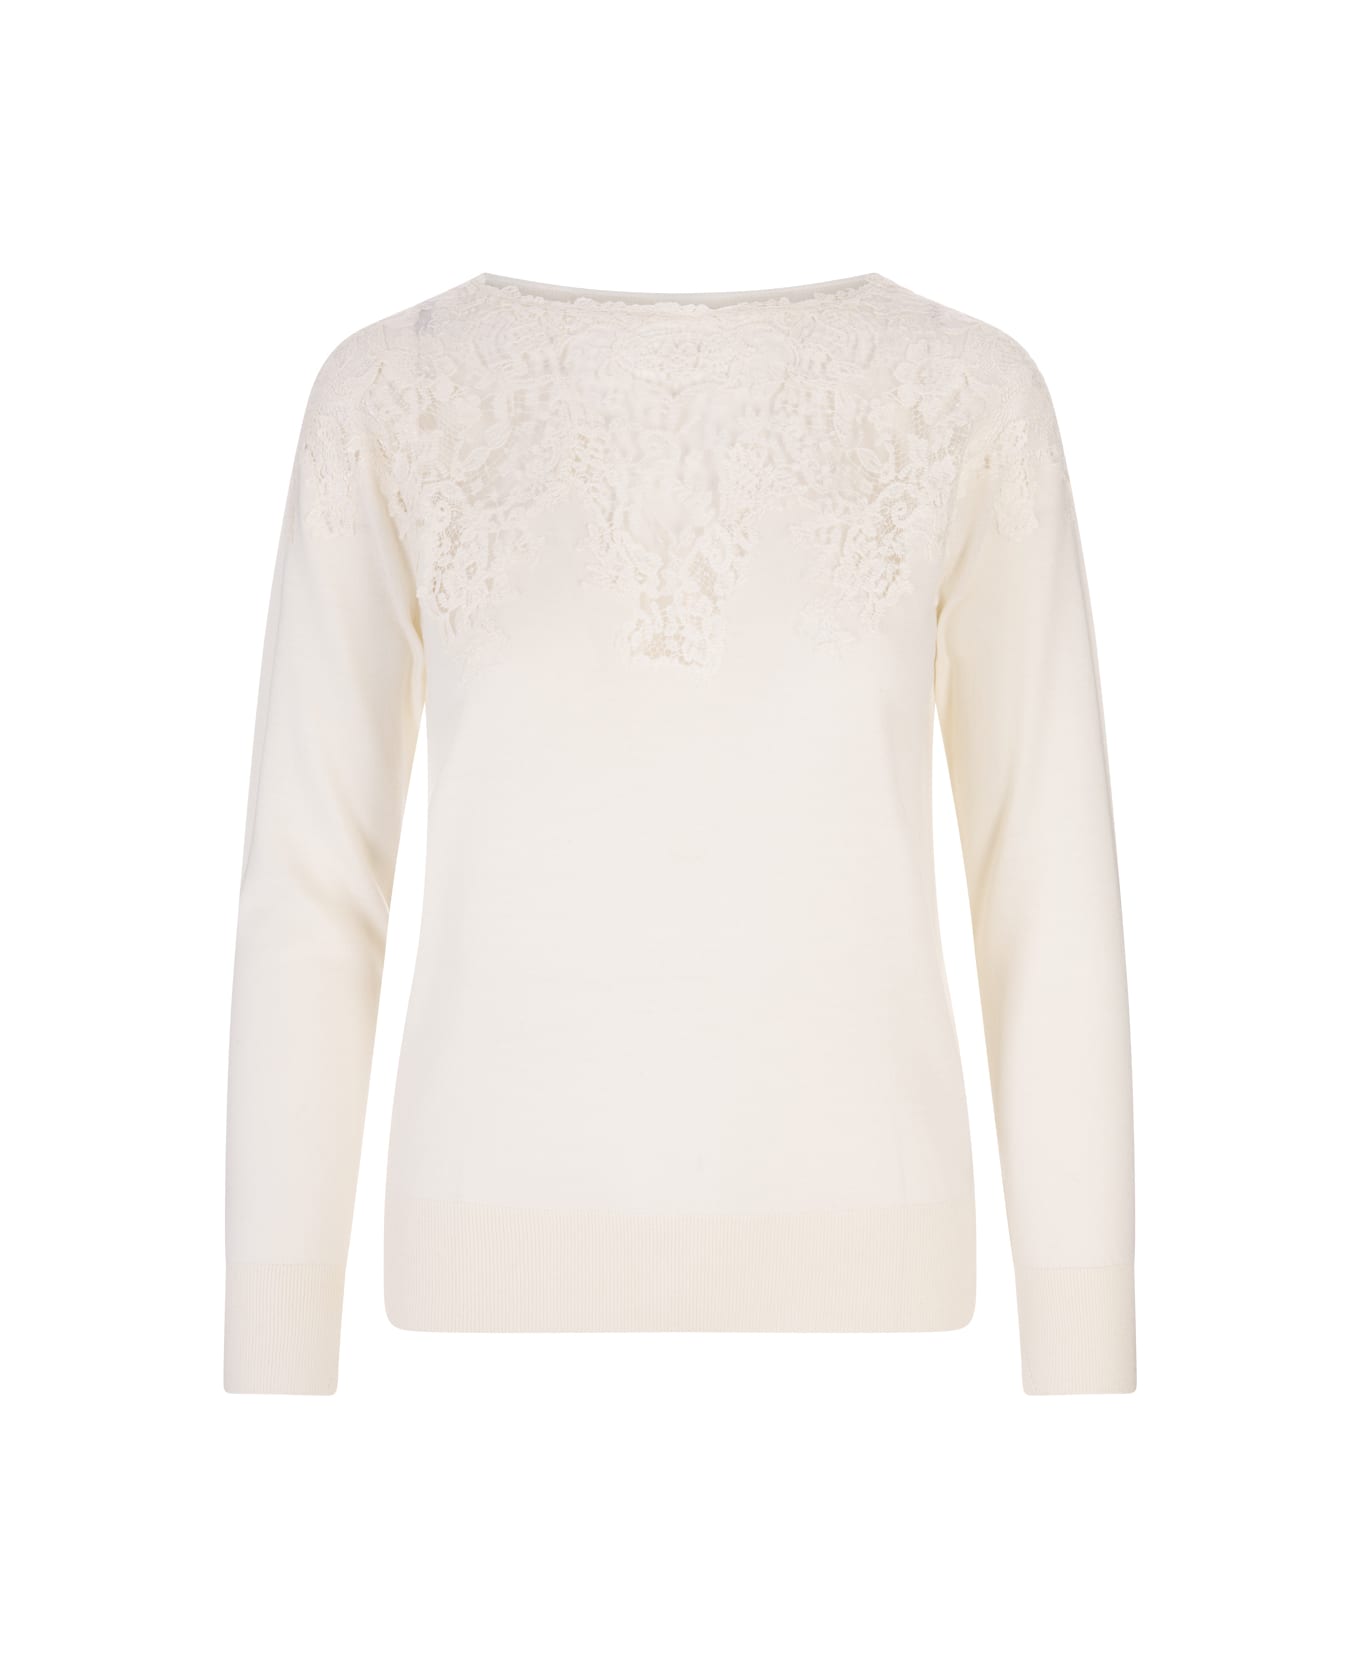 Ermanno Scervino White Wool Sweater With Lace Applications - Bianco